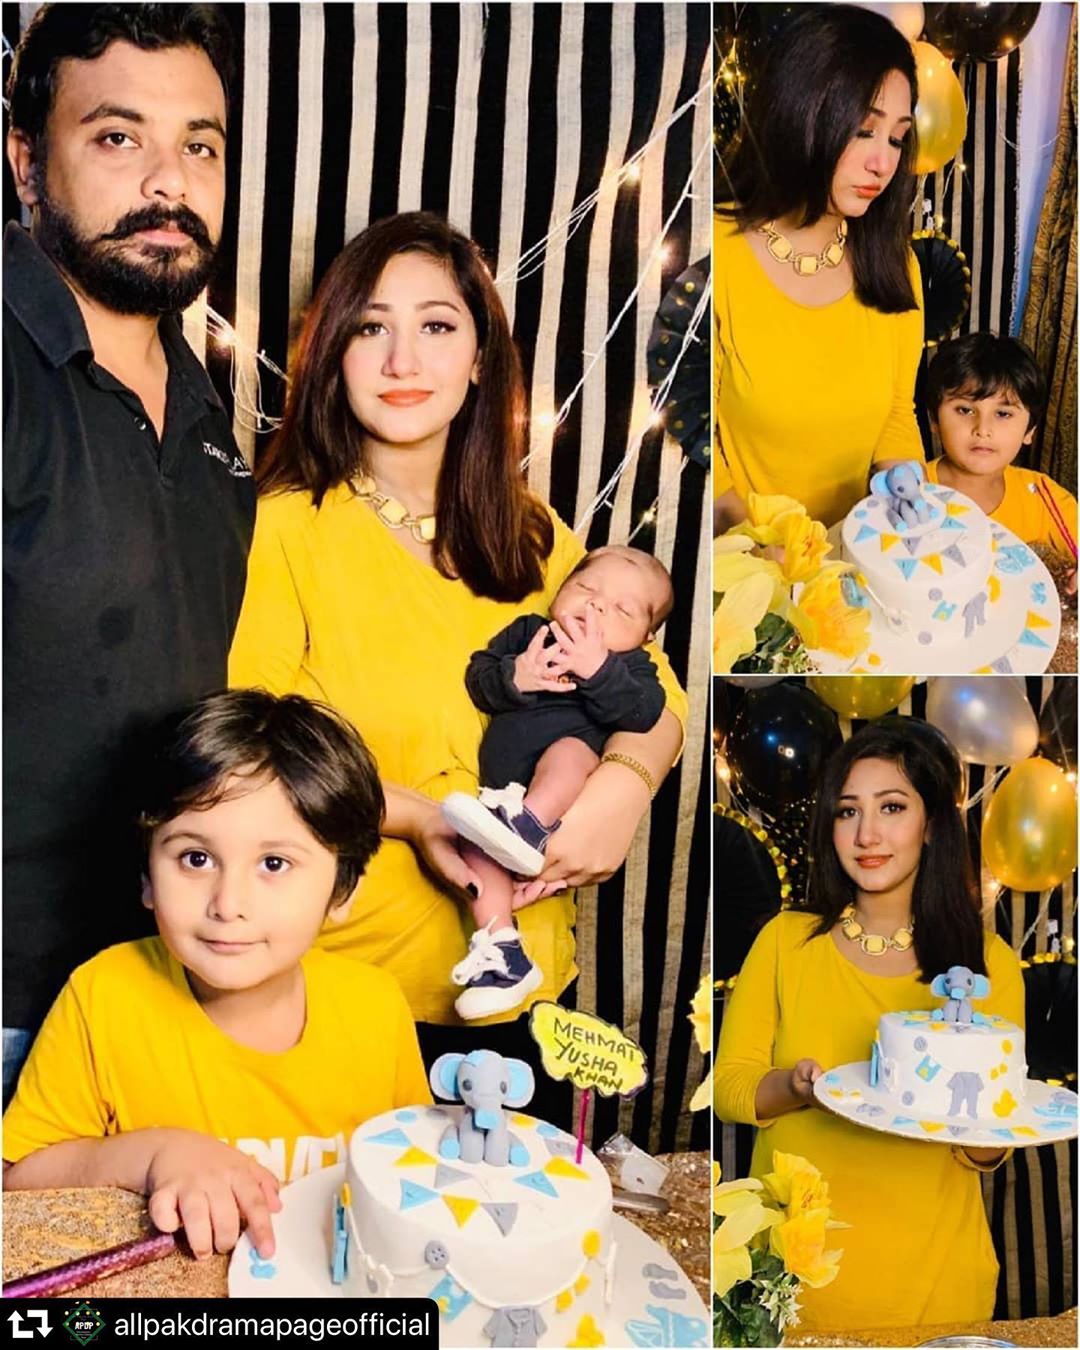 Actress Pari Hashmi Blessed with a Second Baby Boy - Adorable Pictures